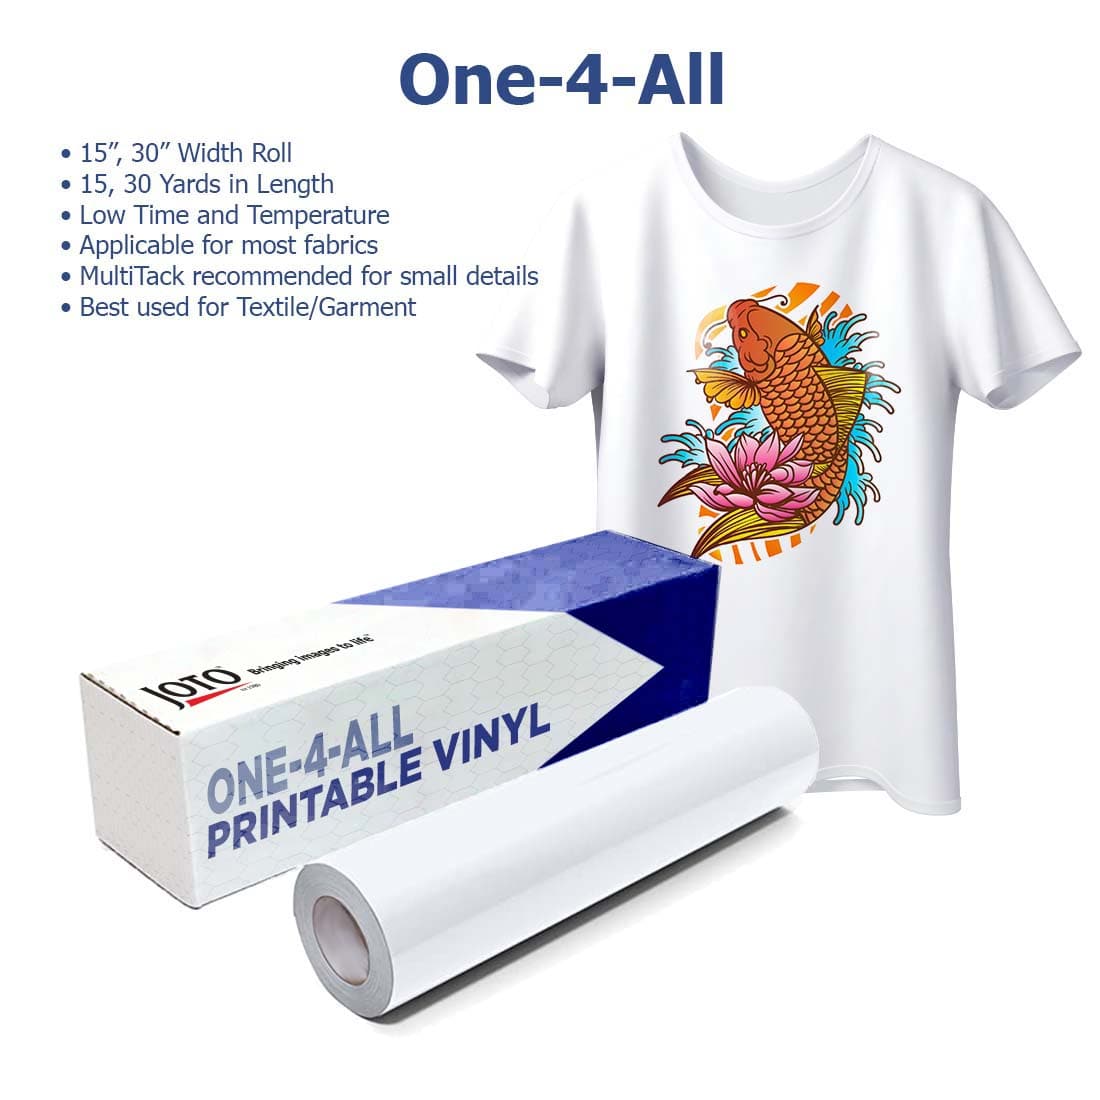 MultiPrint™ One-4-All™ Printable Vinyl - Joto Imaging Supplies US